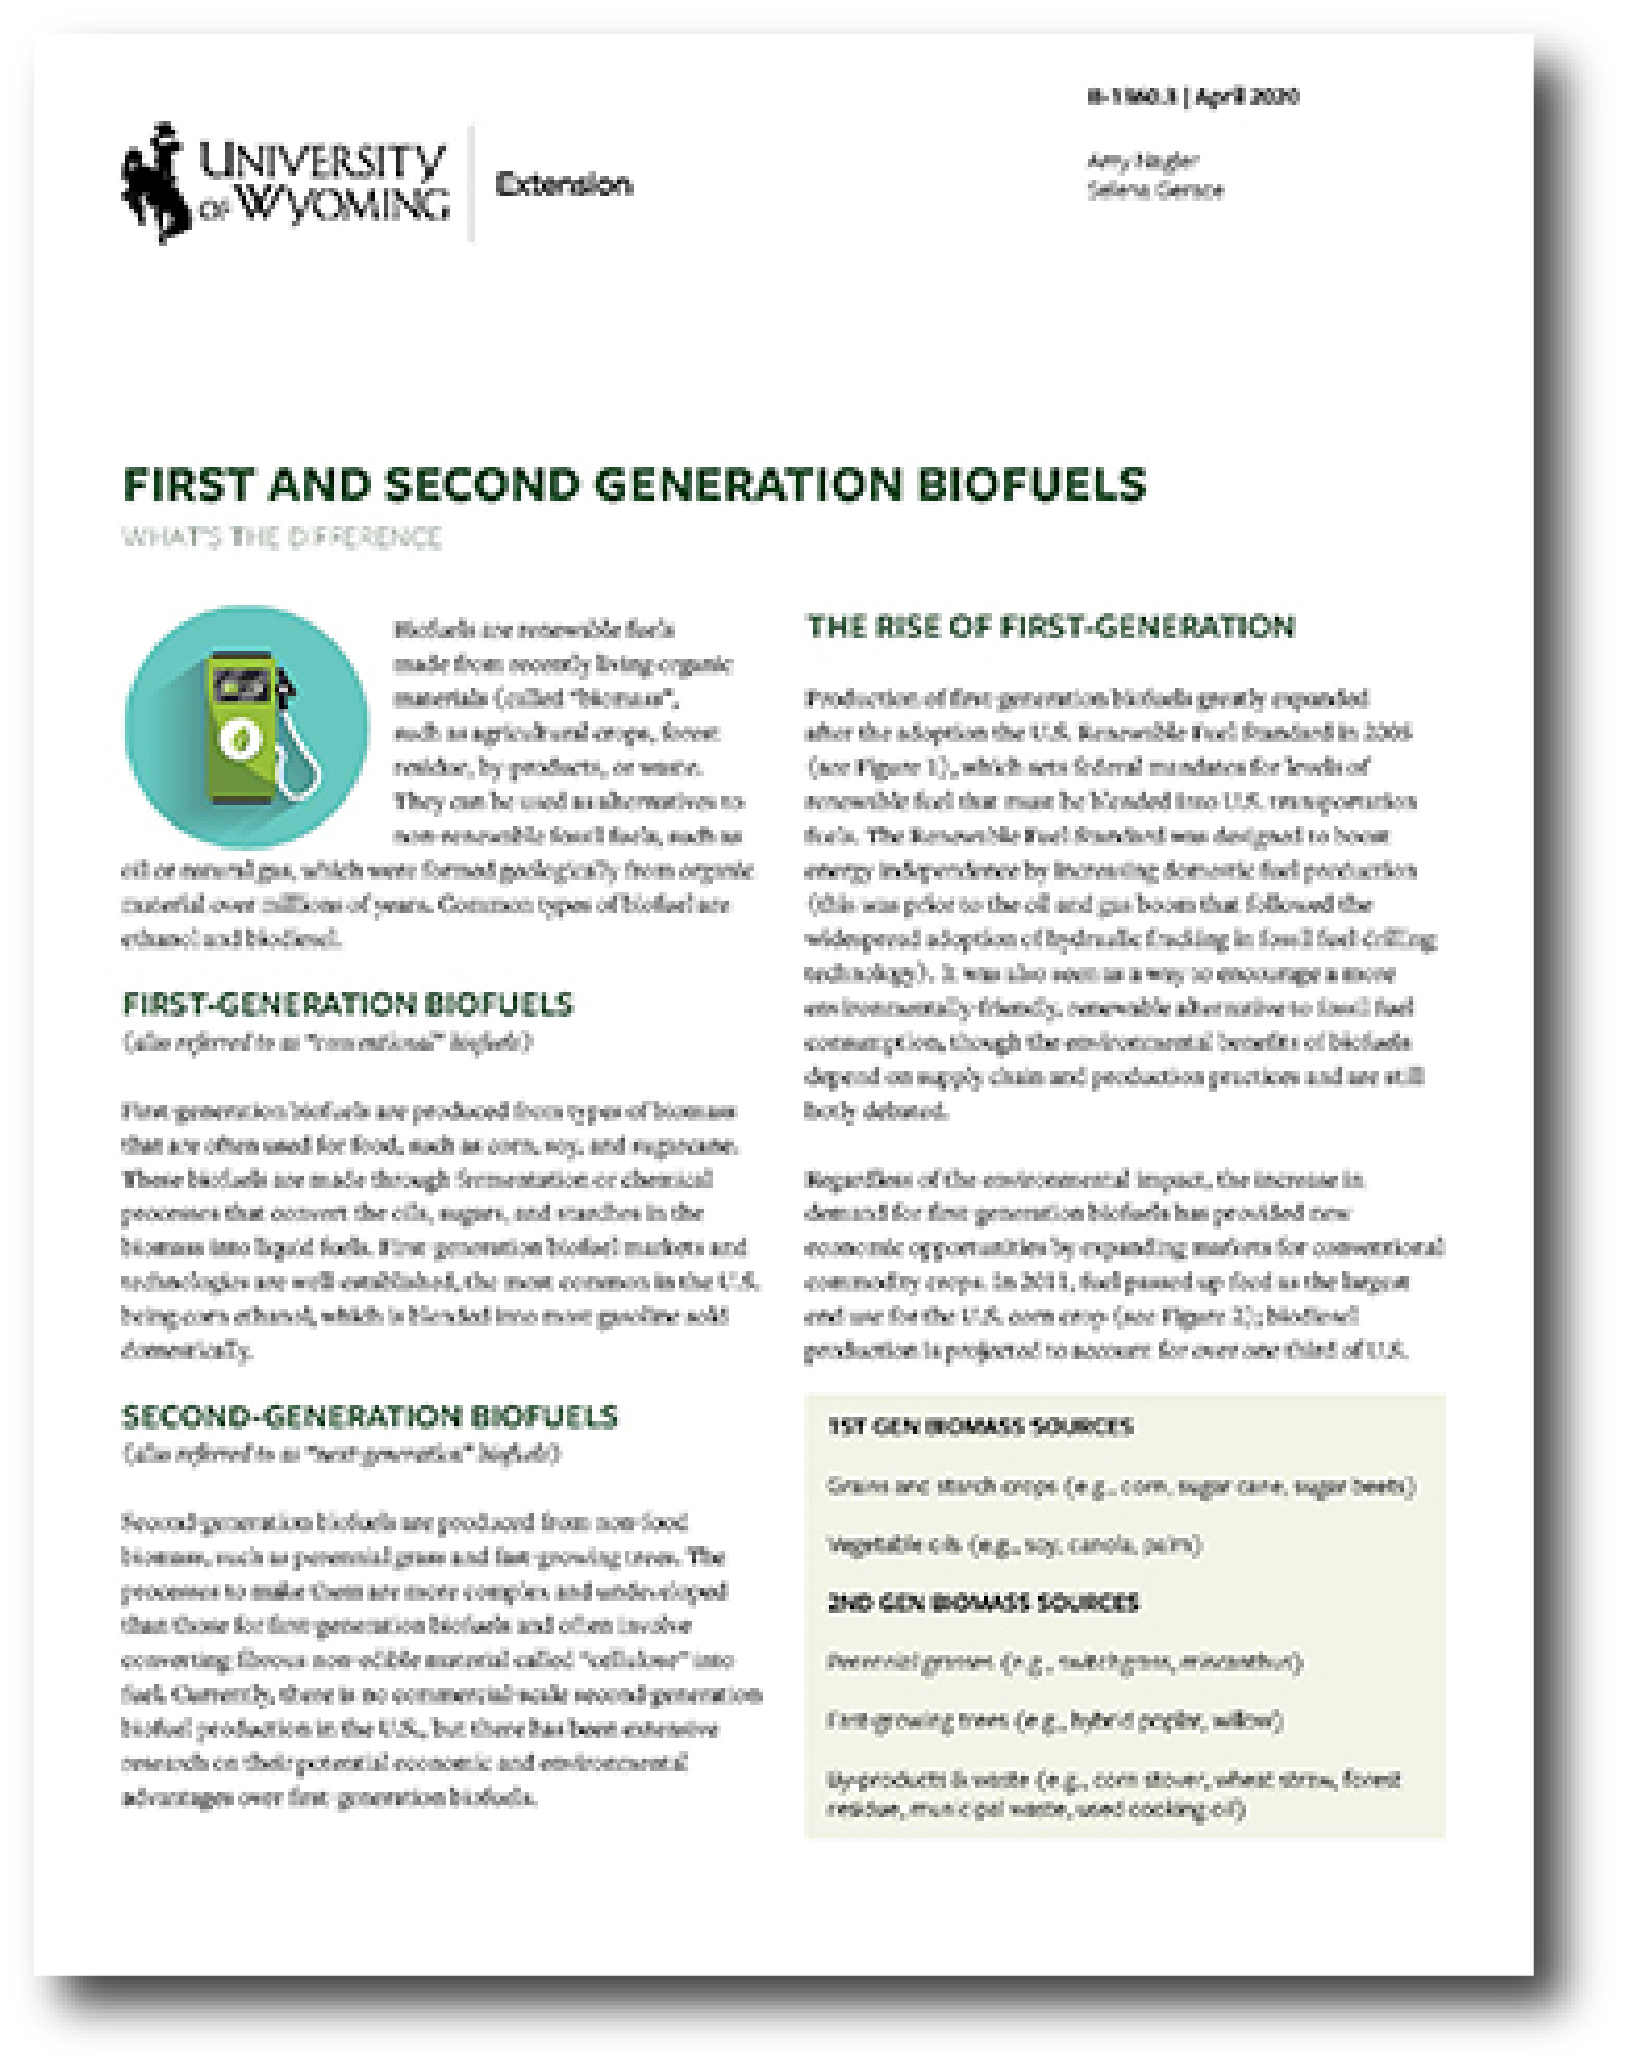 image of the first page of the 'First and Second Generation Biofuels' fact sheet